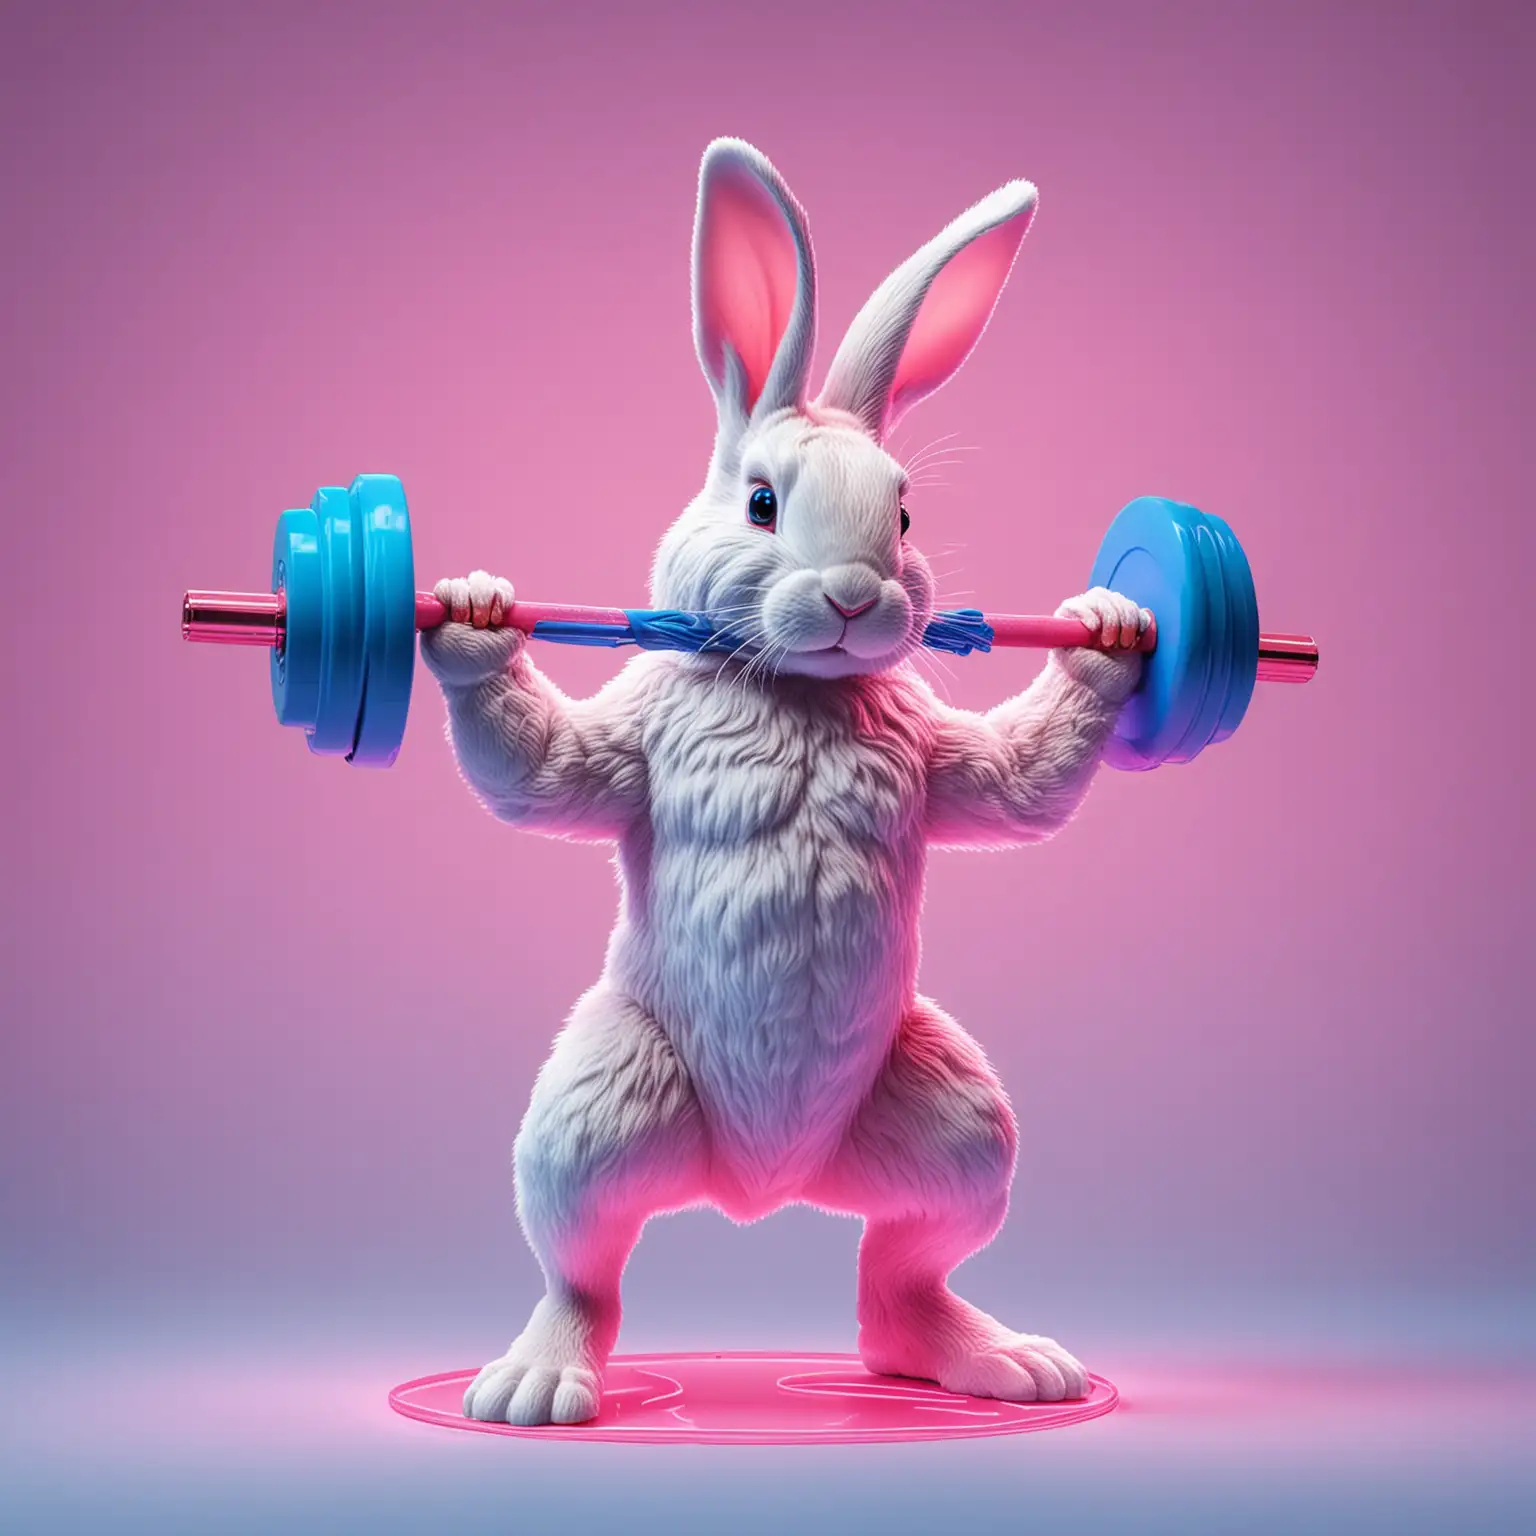 Easter Bunny Powerlifting in Neonlit Gym